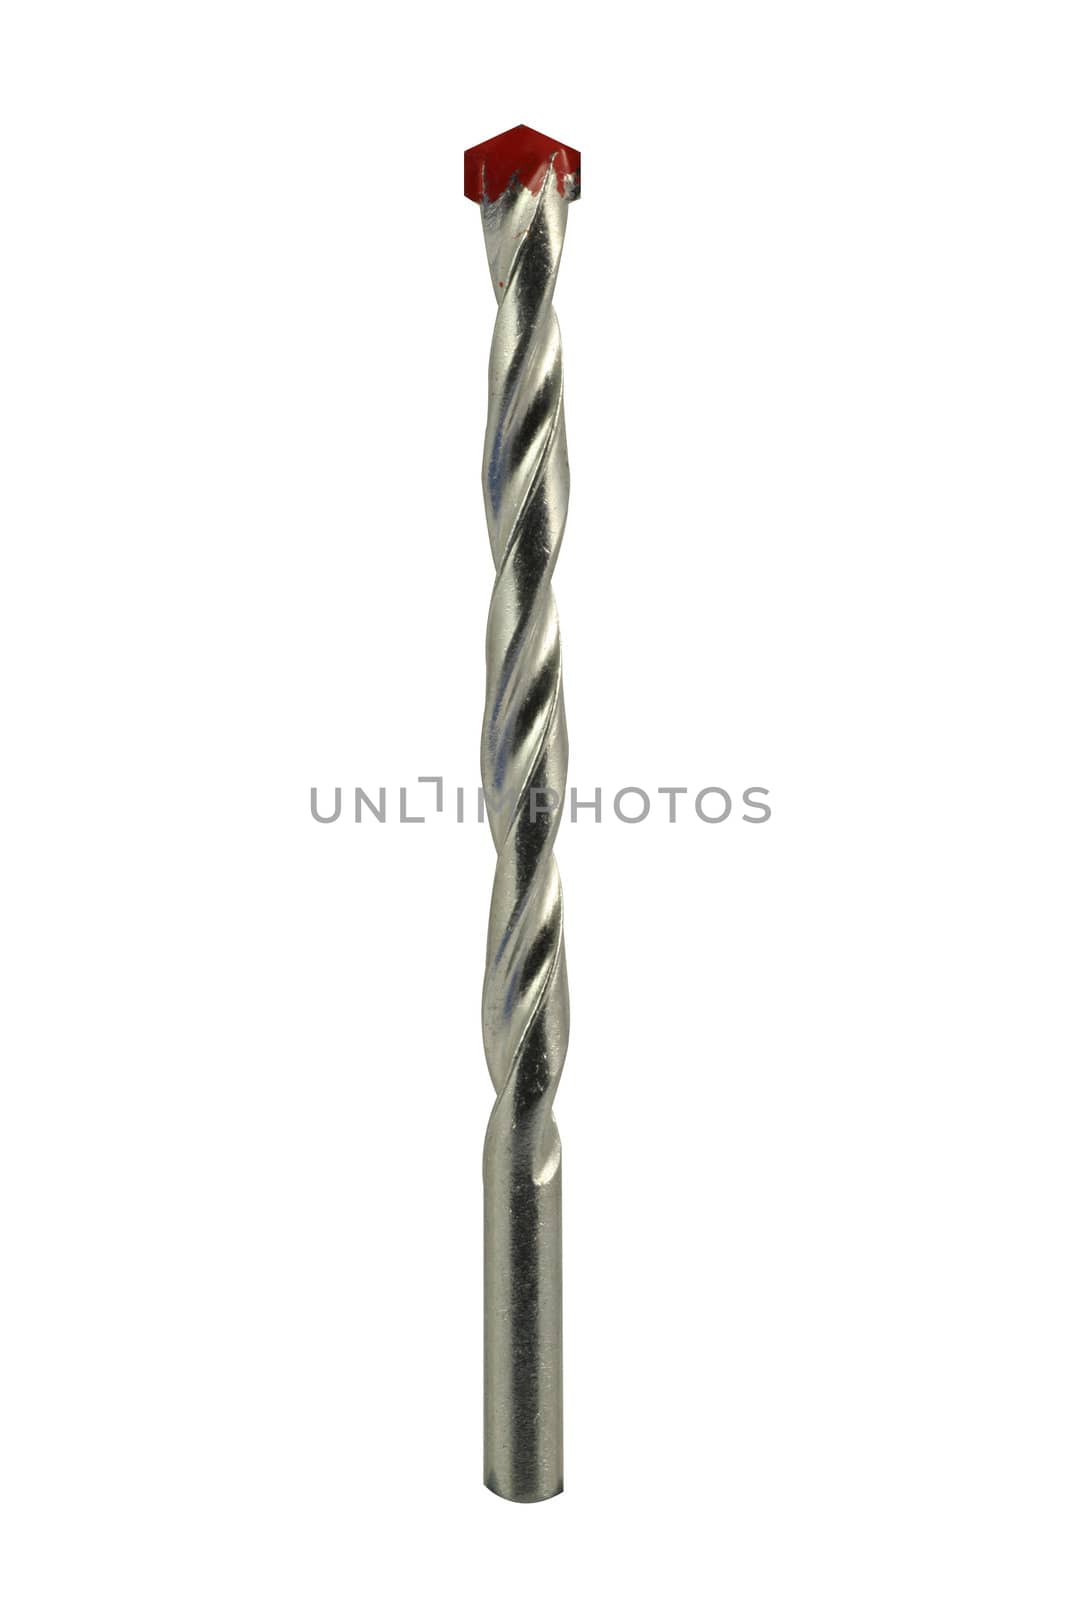 Drill bit with red top isolated in white